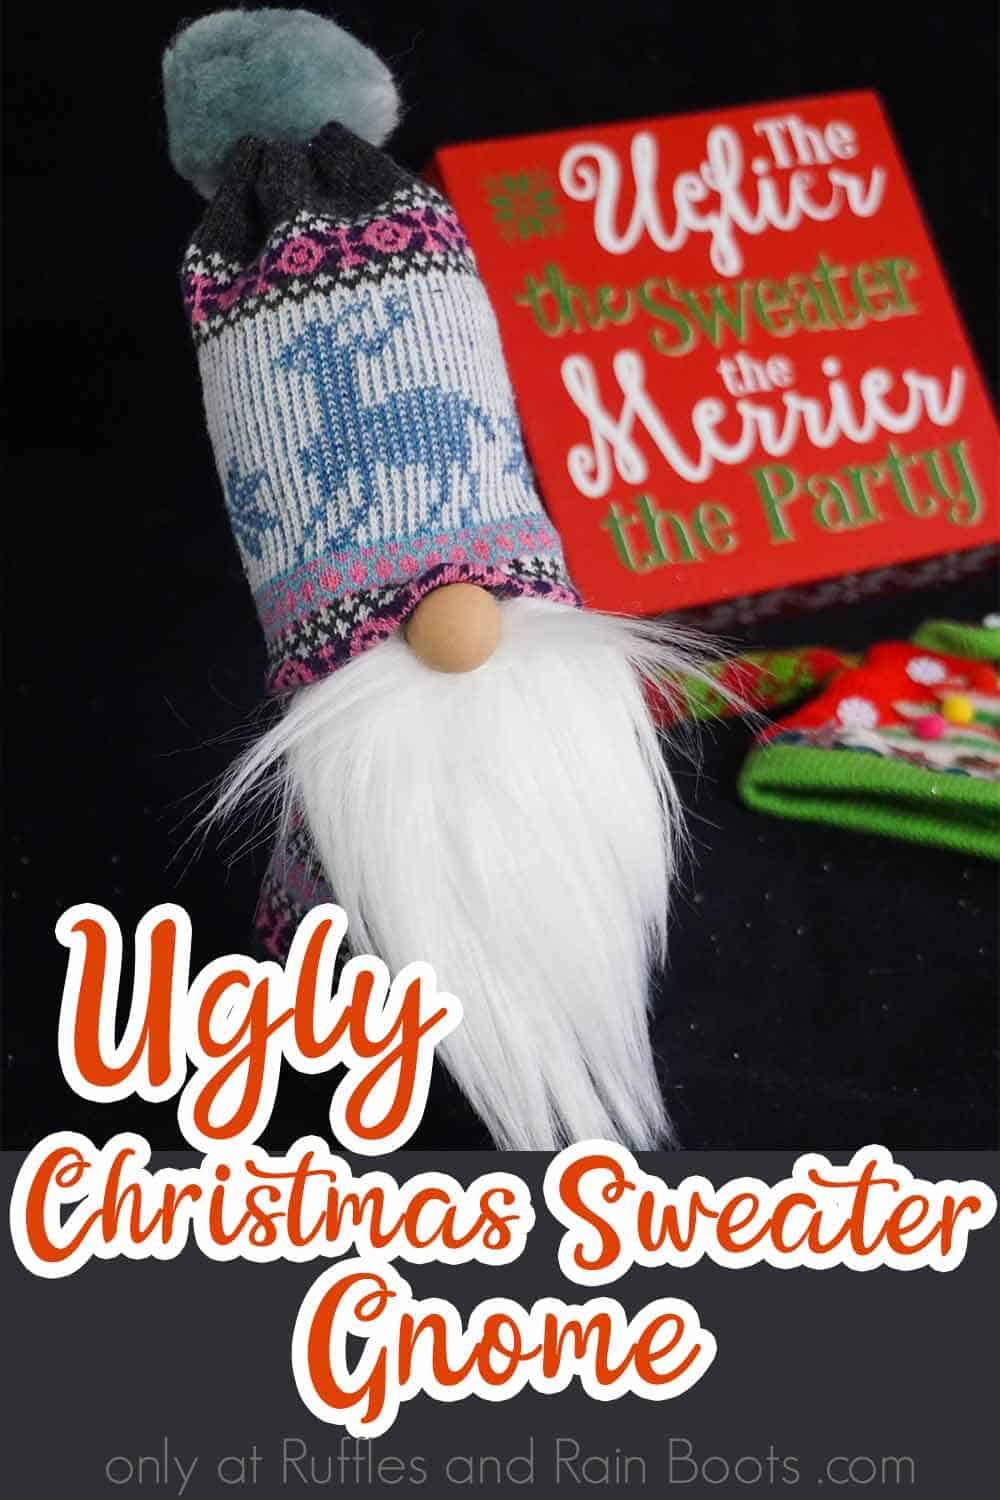 ugly christmas sweater sock gnome on a black background with text which reads ugly christmas sweater gnome